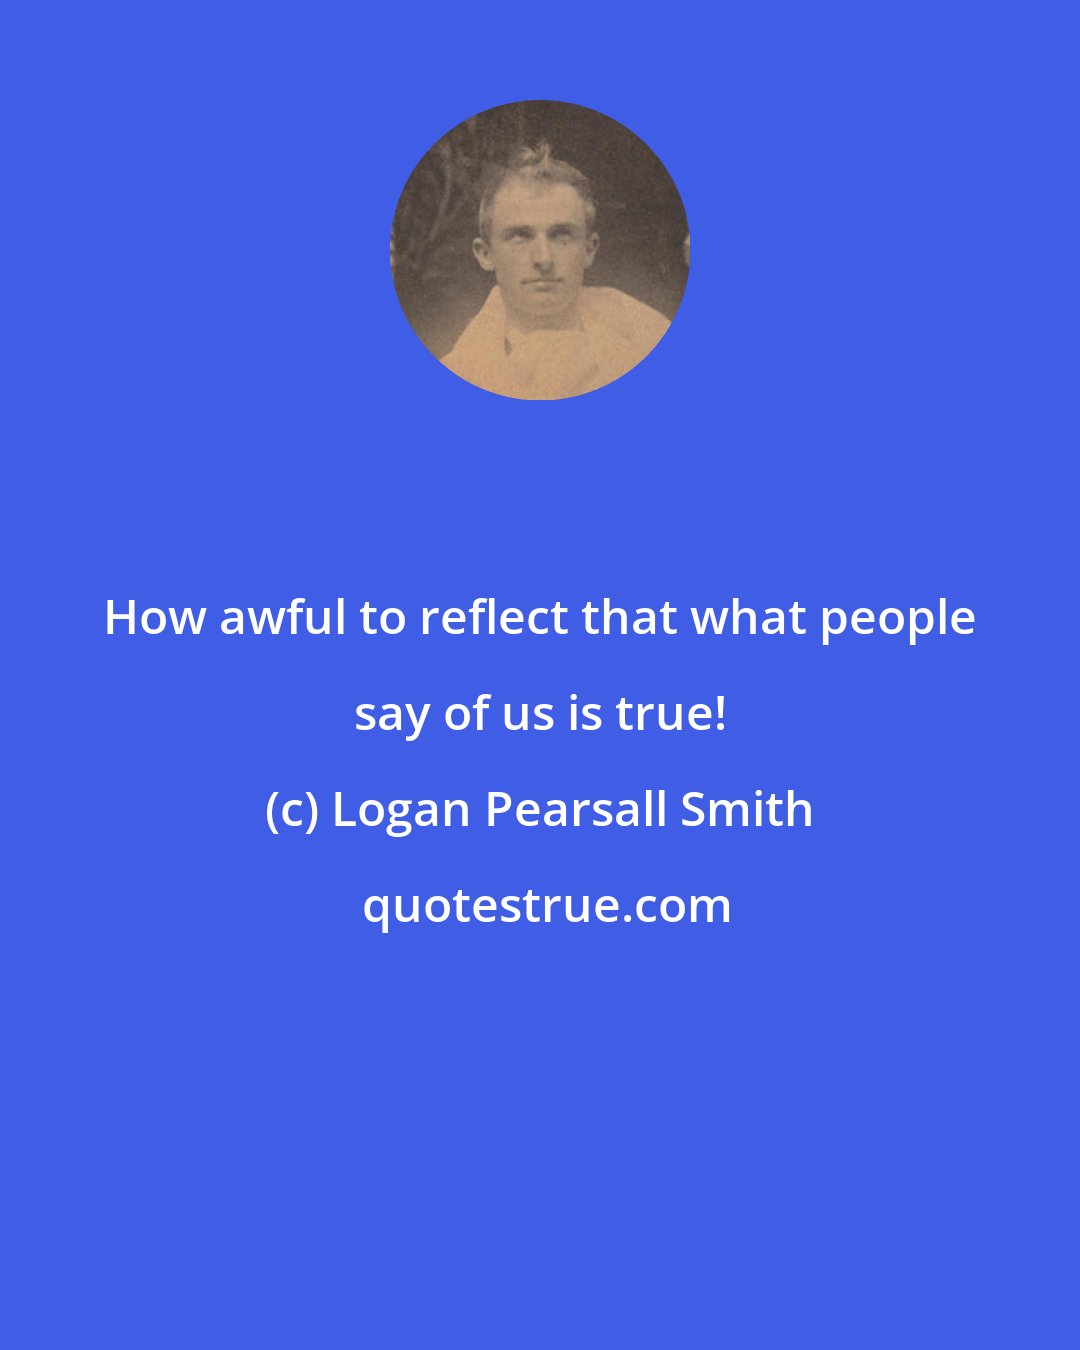 Logan Pearsall Smith: How awful to reflect that what people say of us is true!